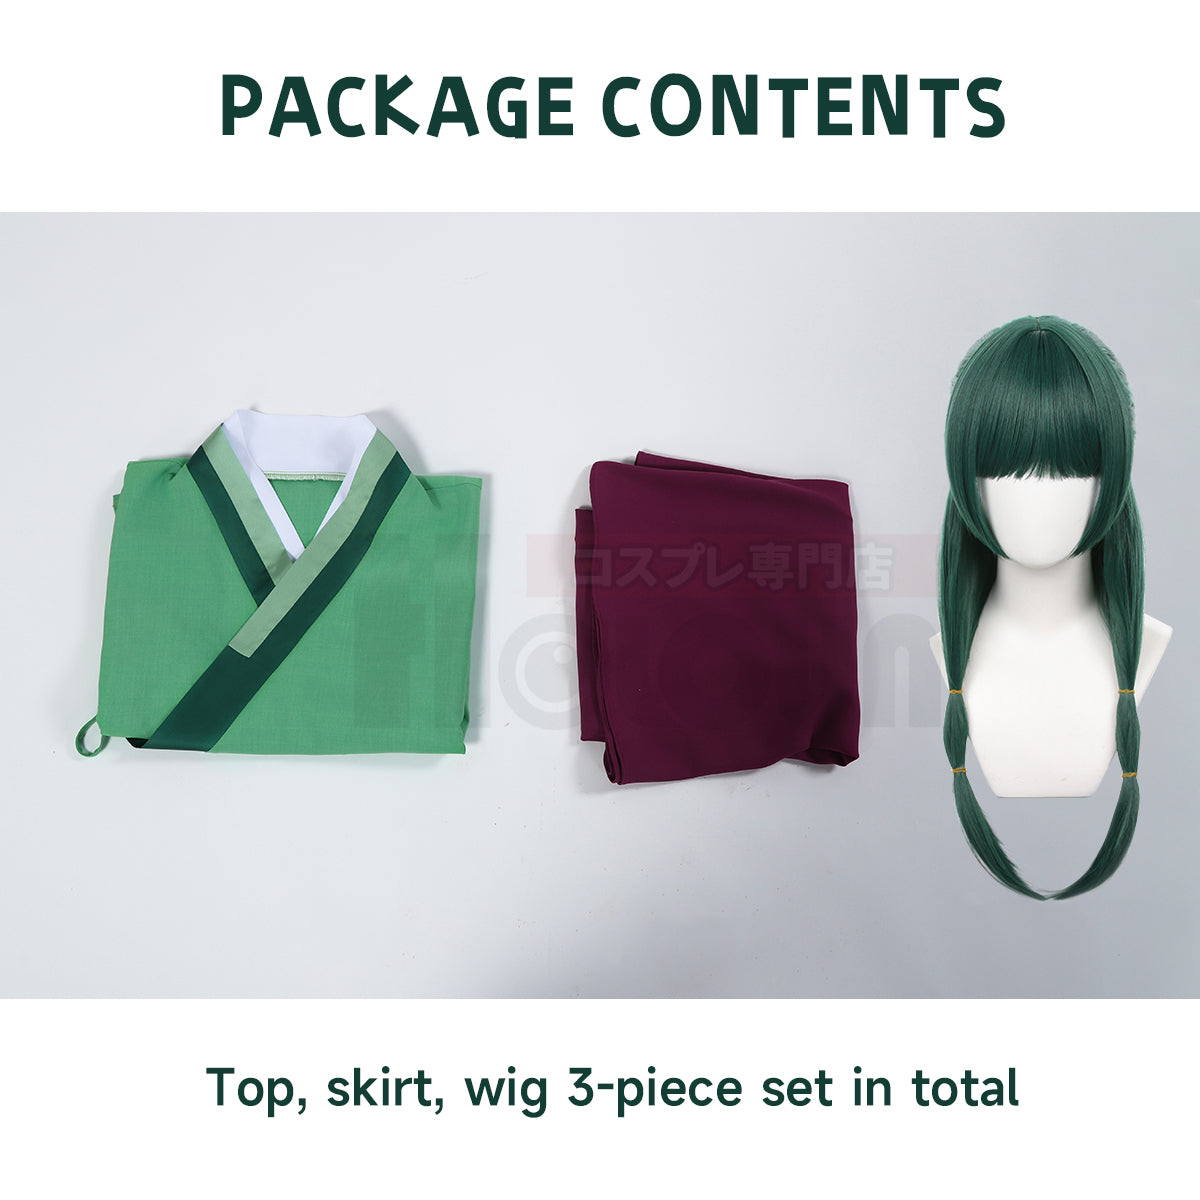 HOLOUN The Apothecary Anime Maomao Cosplay Costume Wig Elastic Skirt Green Top Rose Net Synthetic Fiber Cos Convention Gift